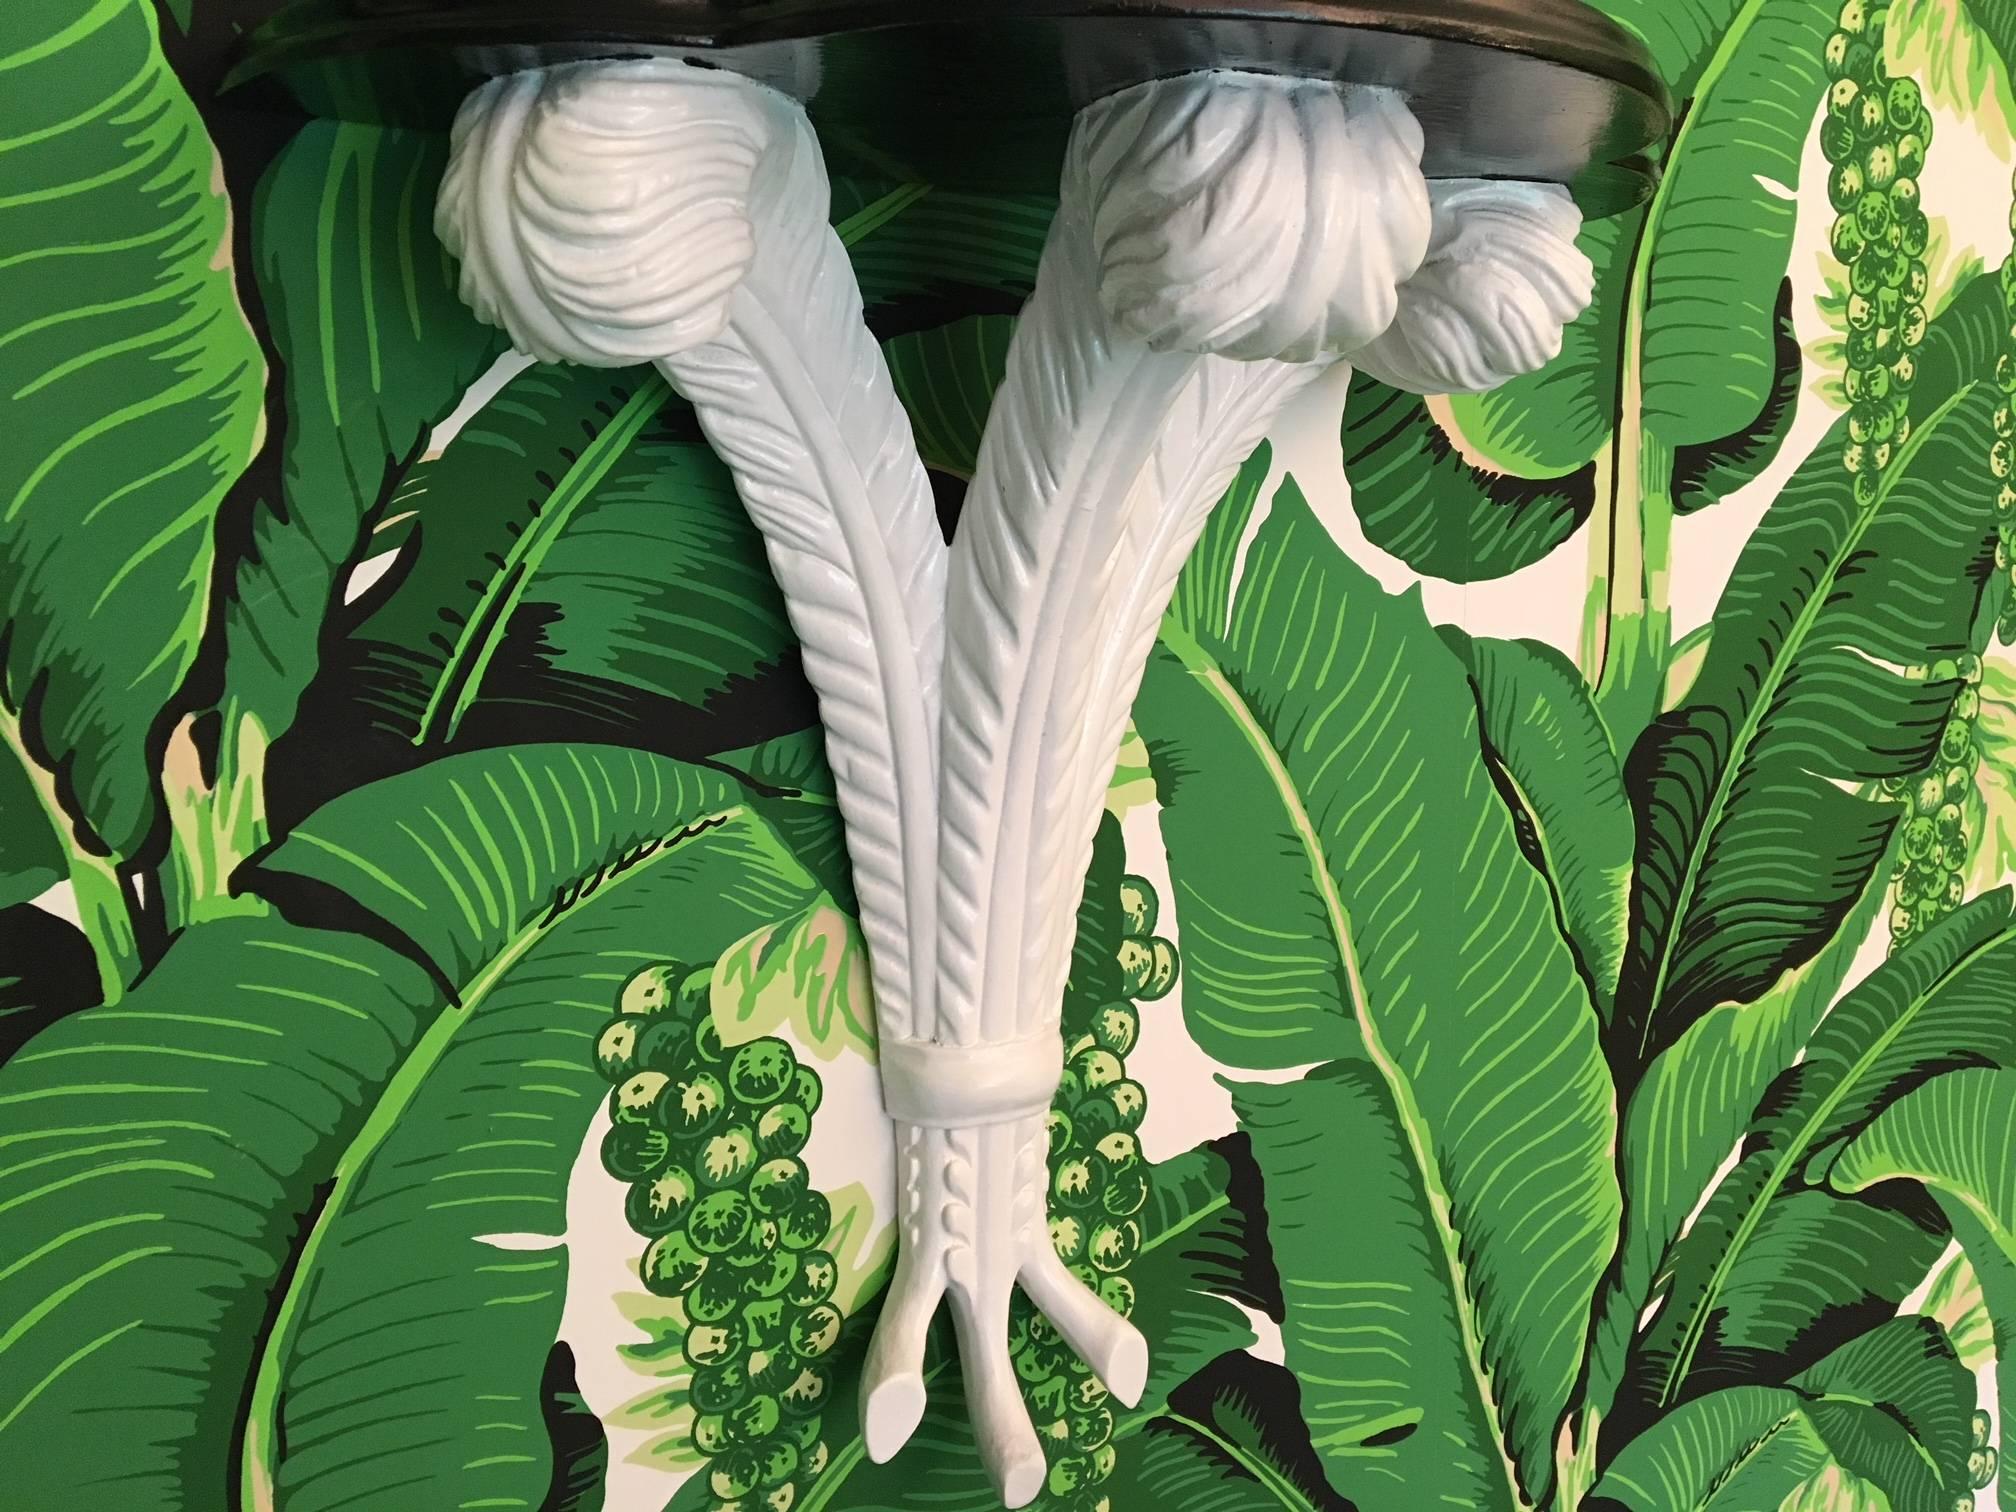 Fabulous pair of large Serge Roche hand-carved plume wall shelves in iconic Dorothy Draper style. Excellent condition with almost no flaws to the newly lacquered black and white finish.